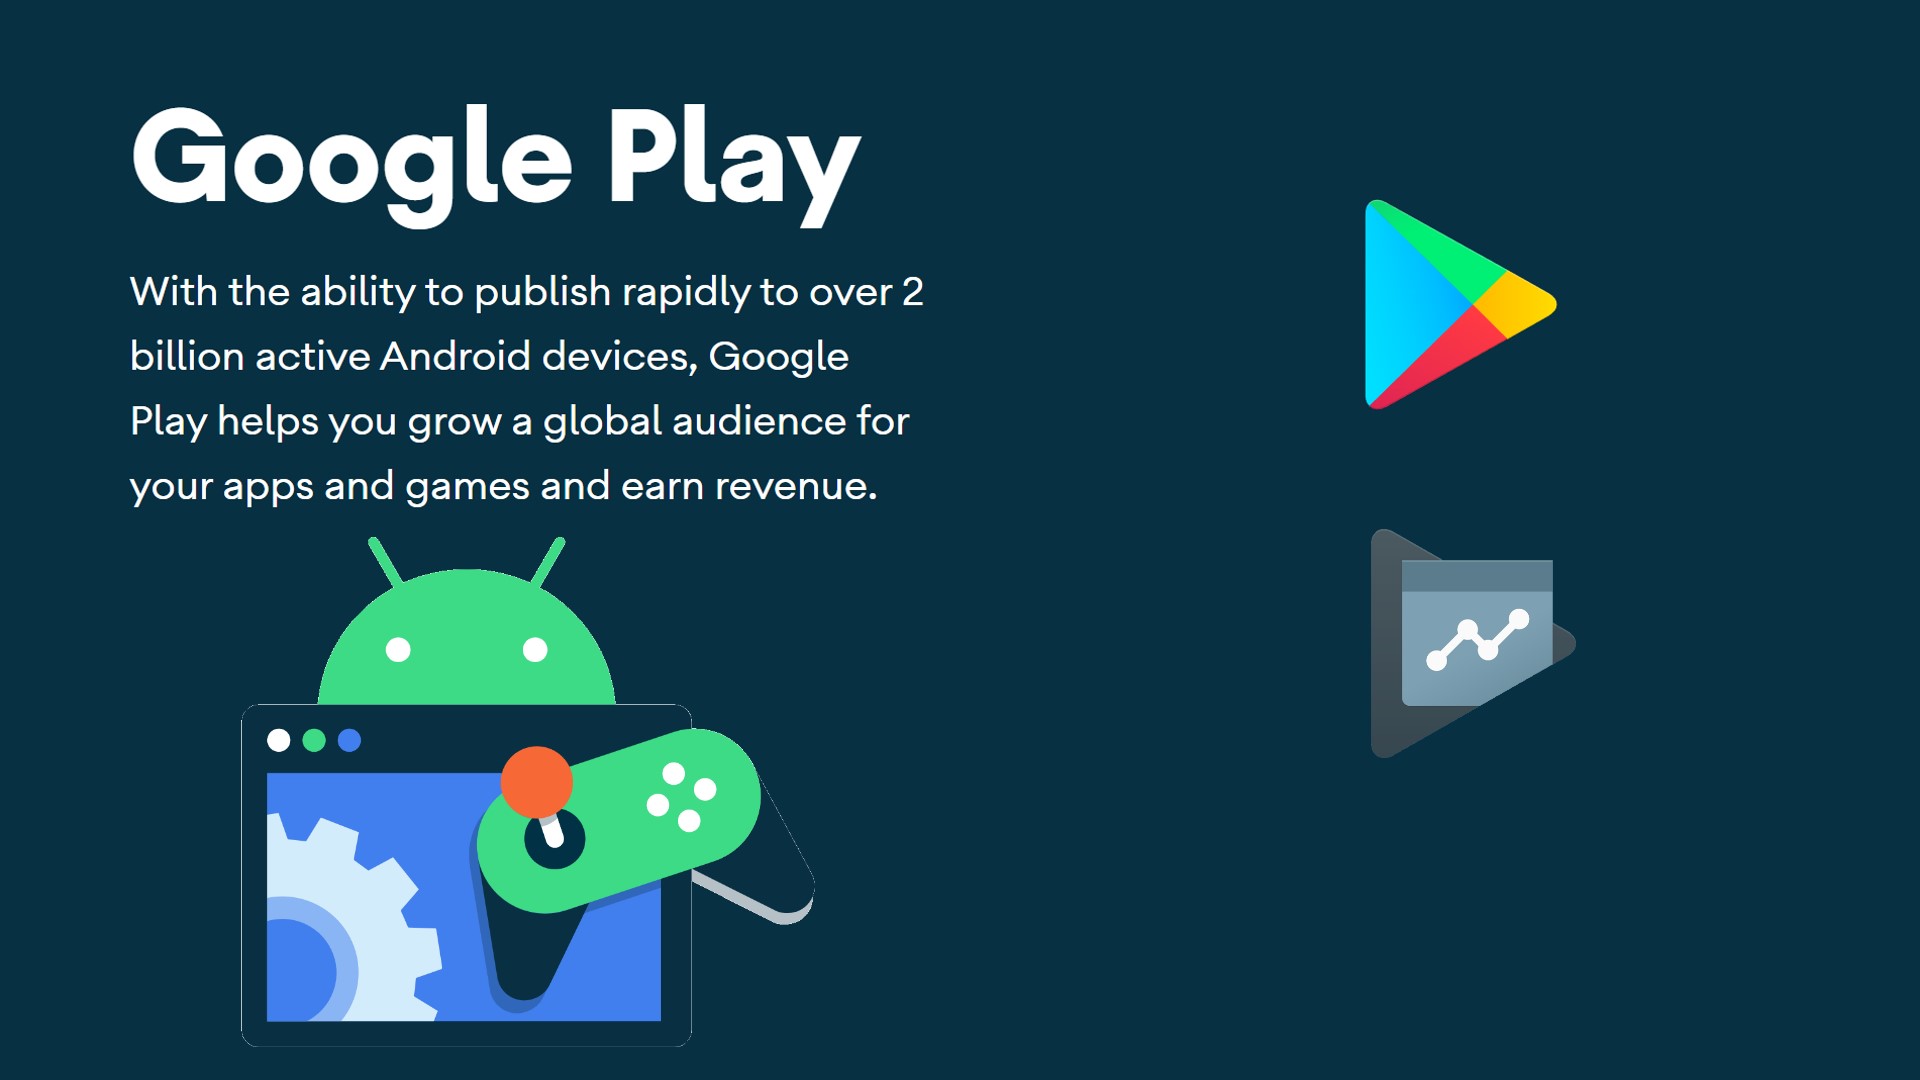 Android Apps by Freeplay Inc on Google Play